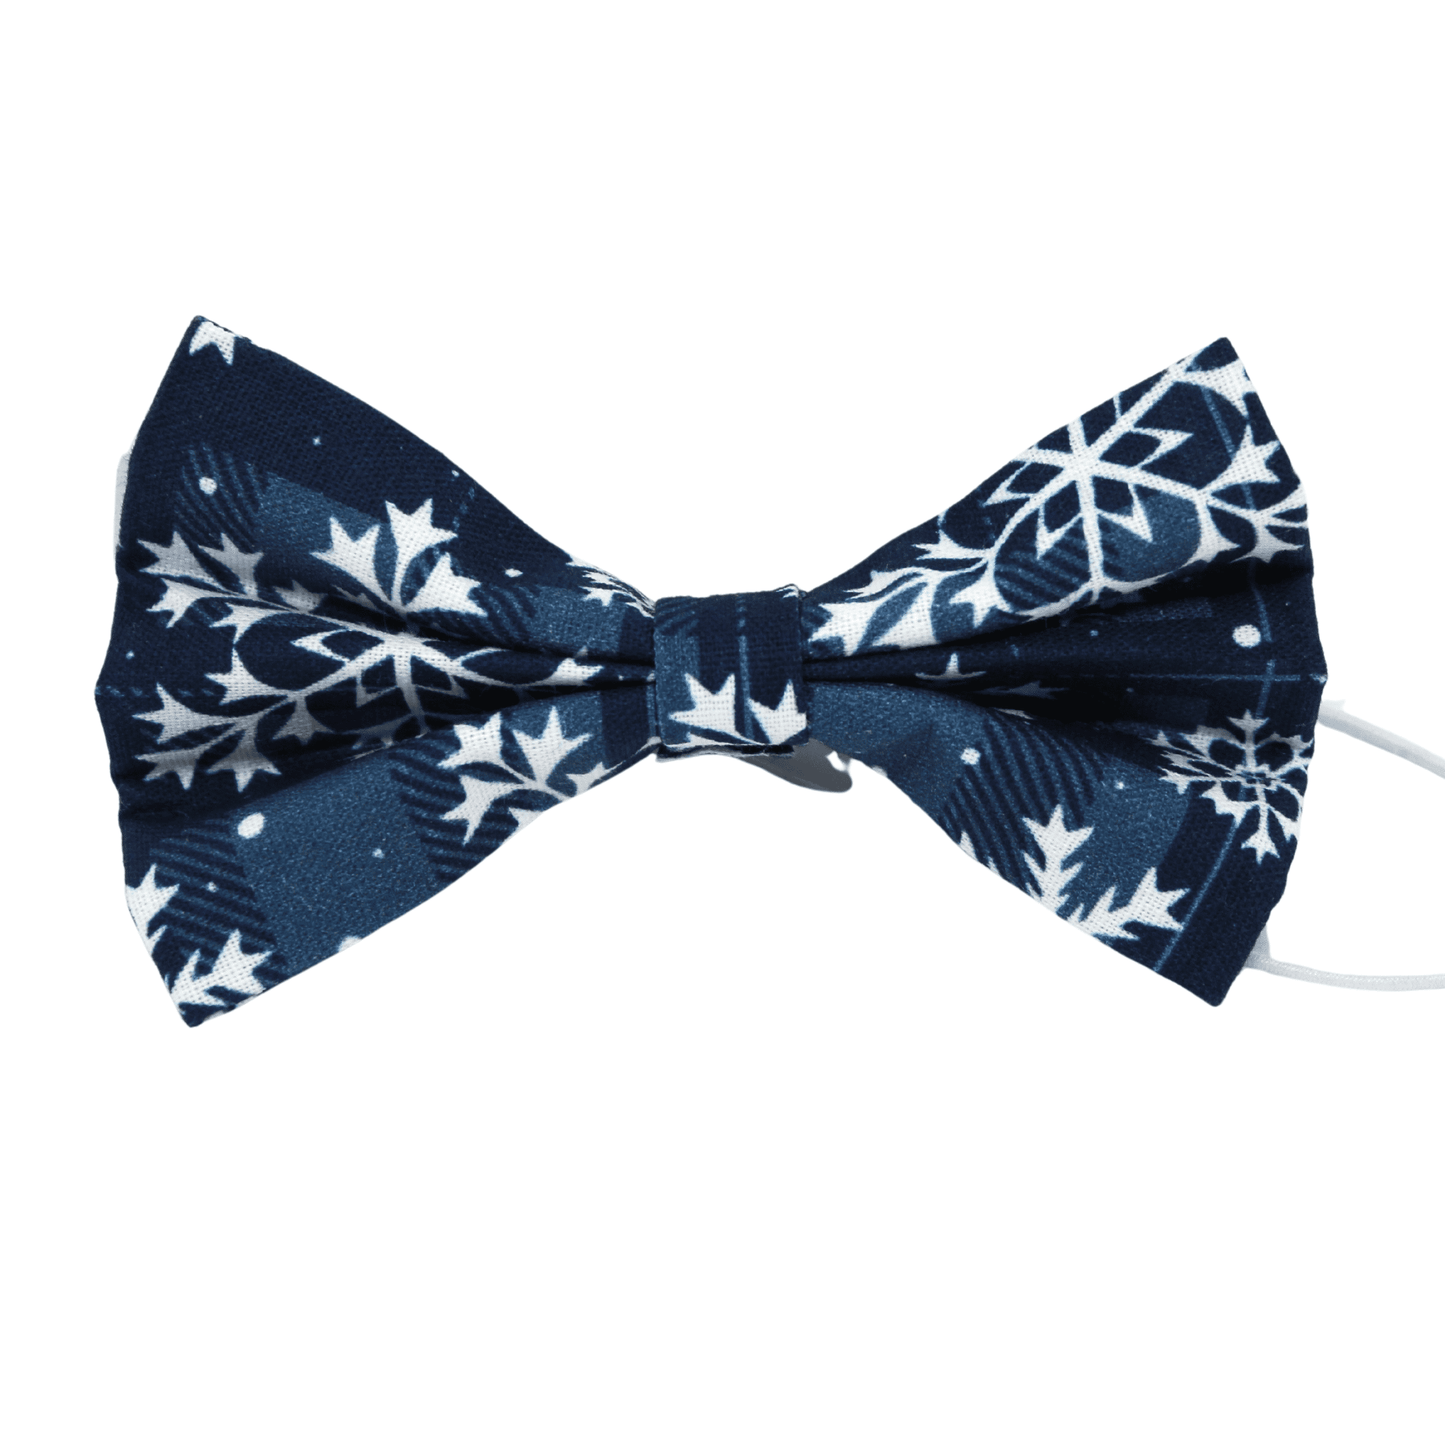 ''Frosted'' bow tie